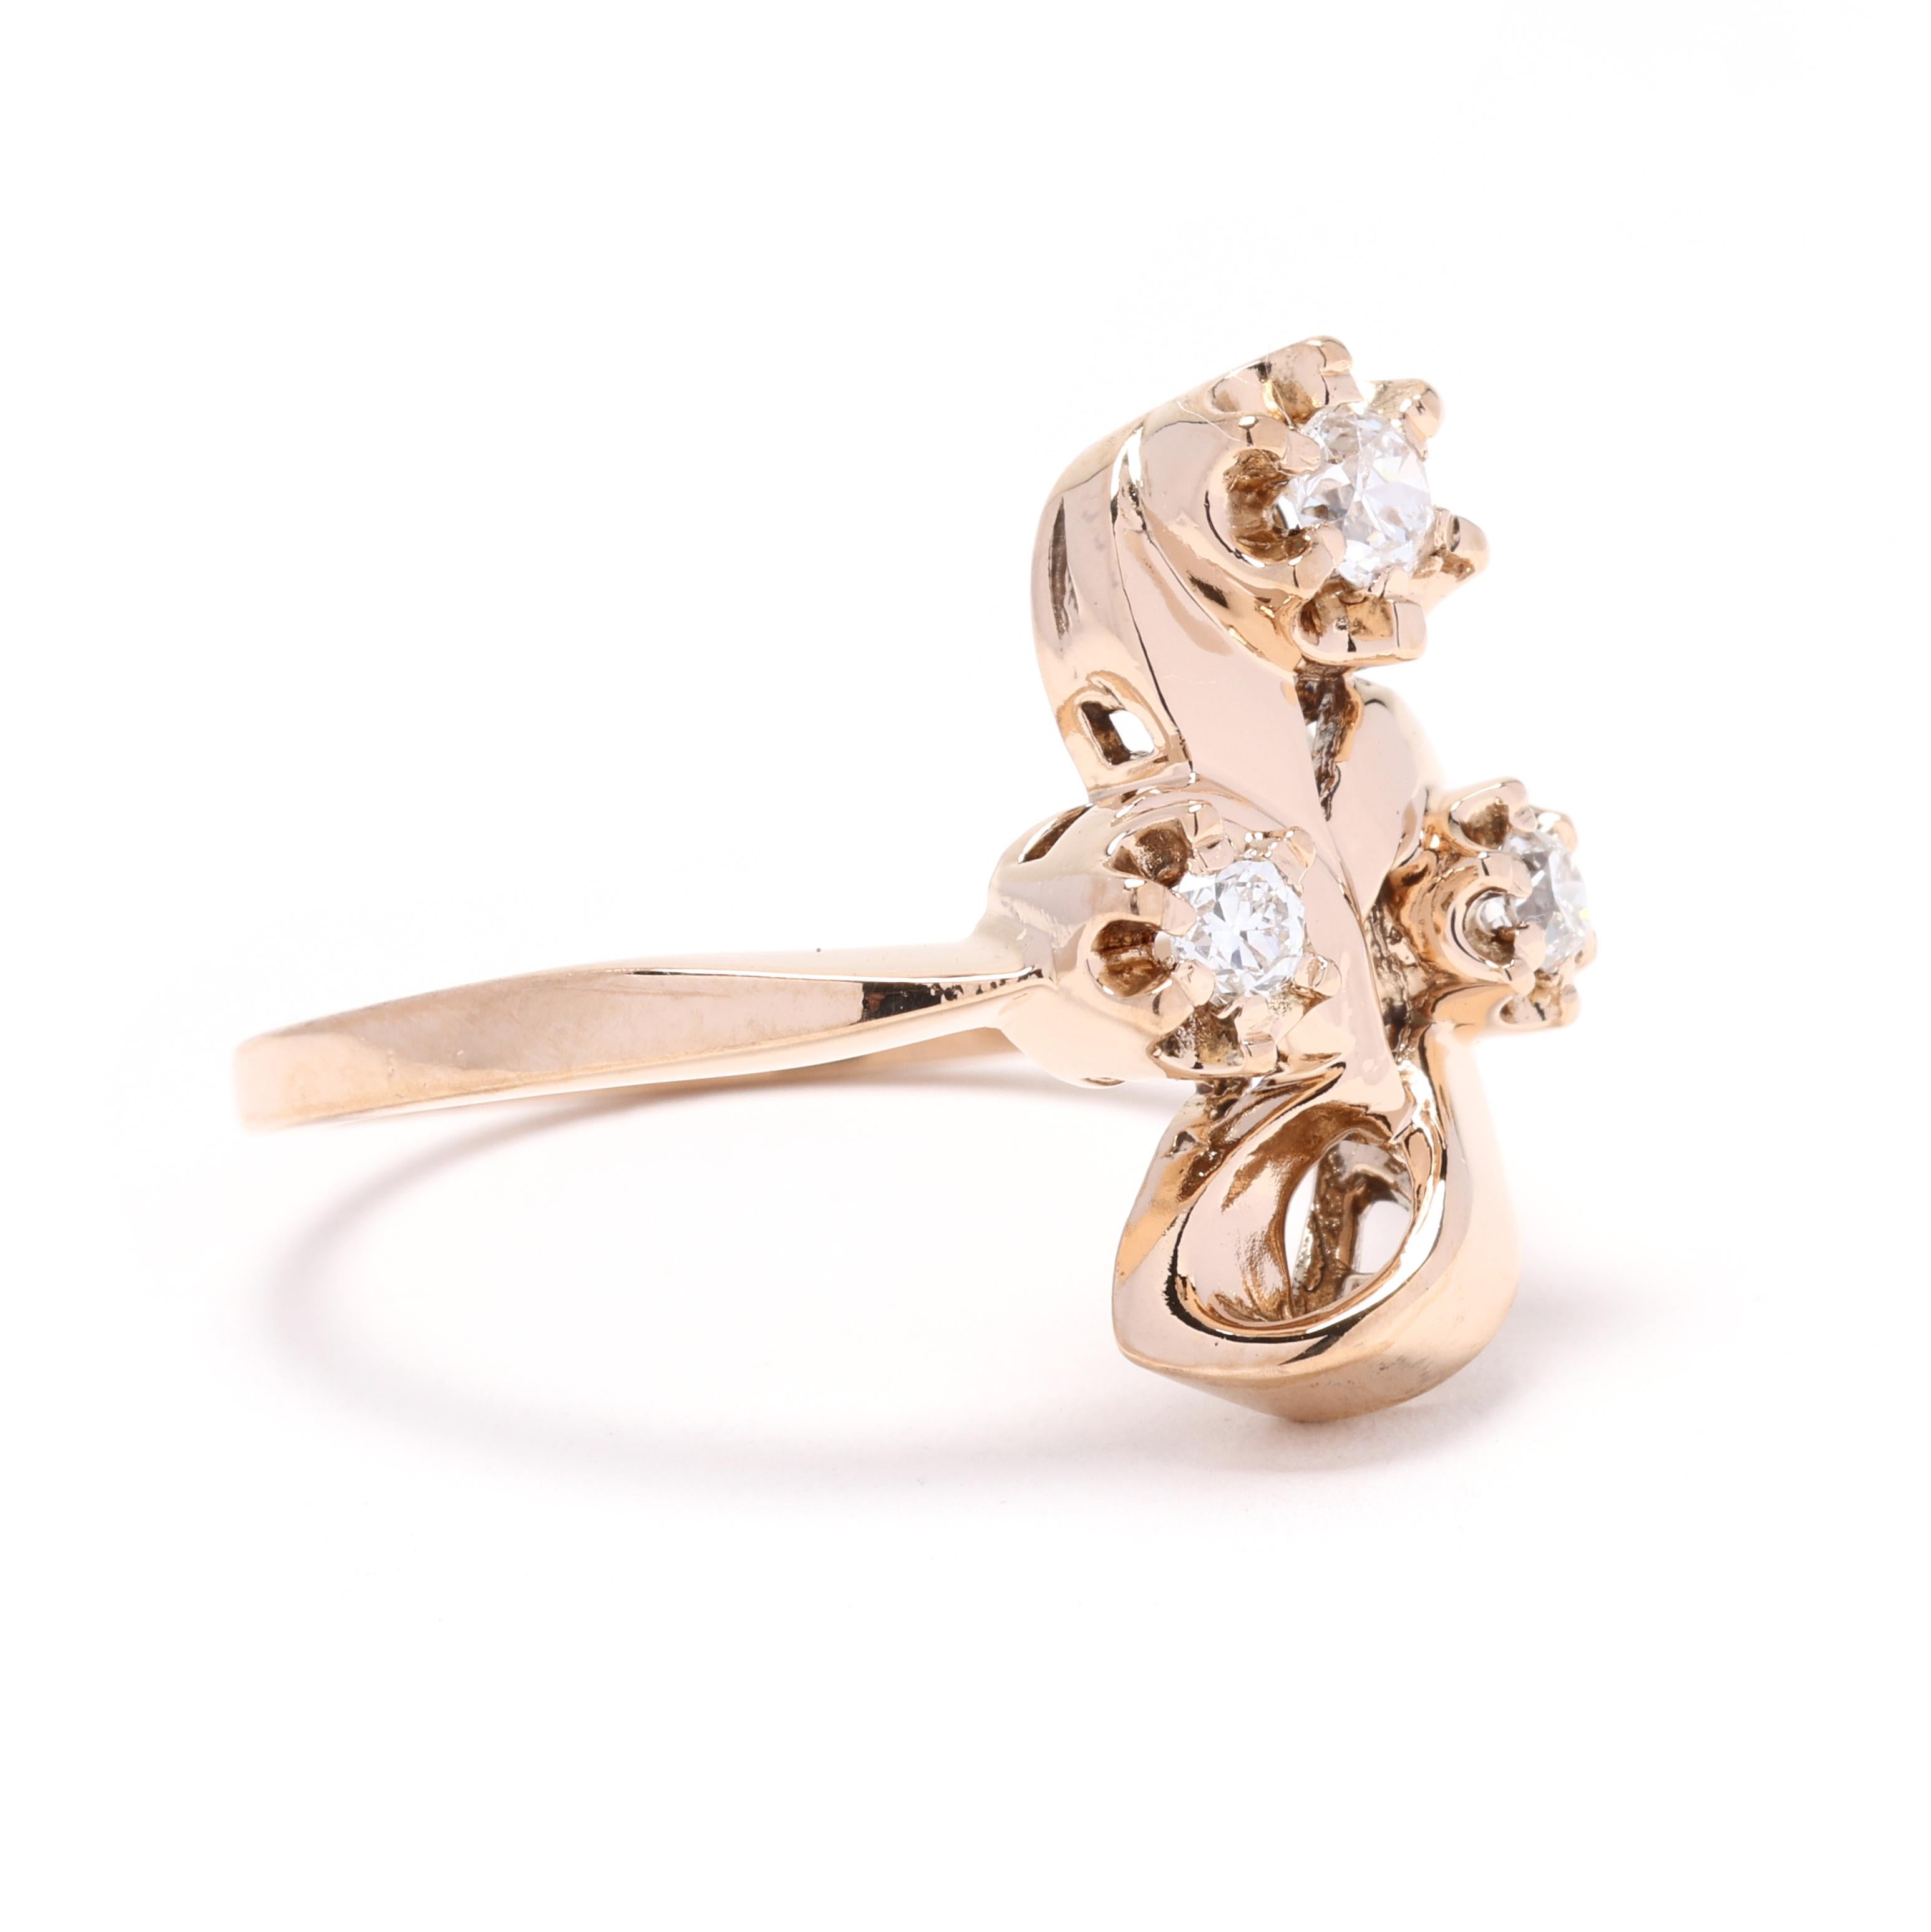 This vintage diamond flower bouquet ring is a timeless piece of jewelry that will surely make a statement. The diamonds have a total weight of 0.22ctw and are carefully set to accentuate their brilliance. The intricate detailing of the flowers and